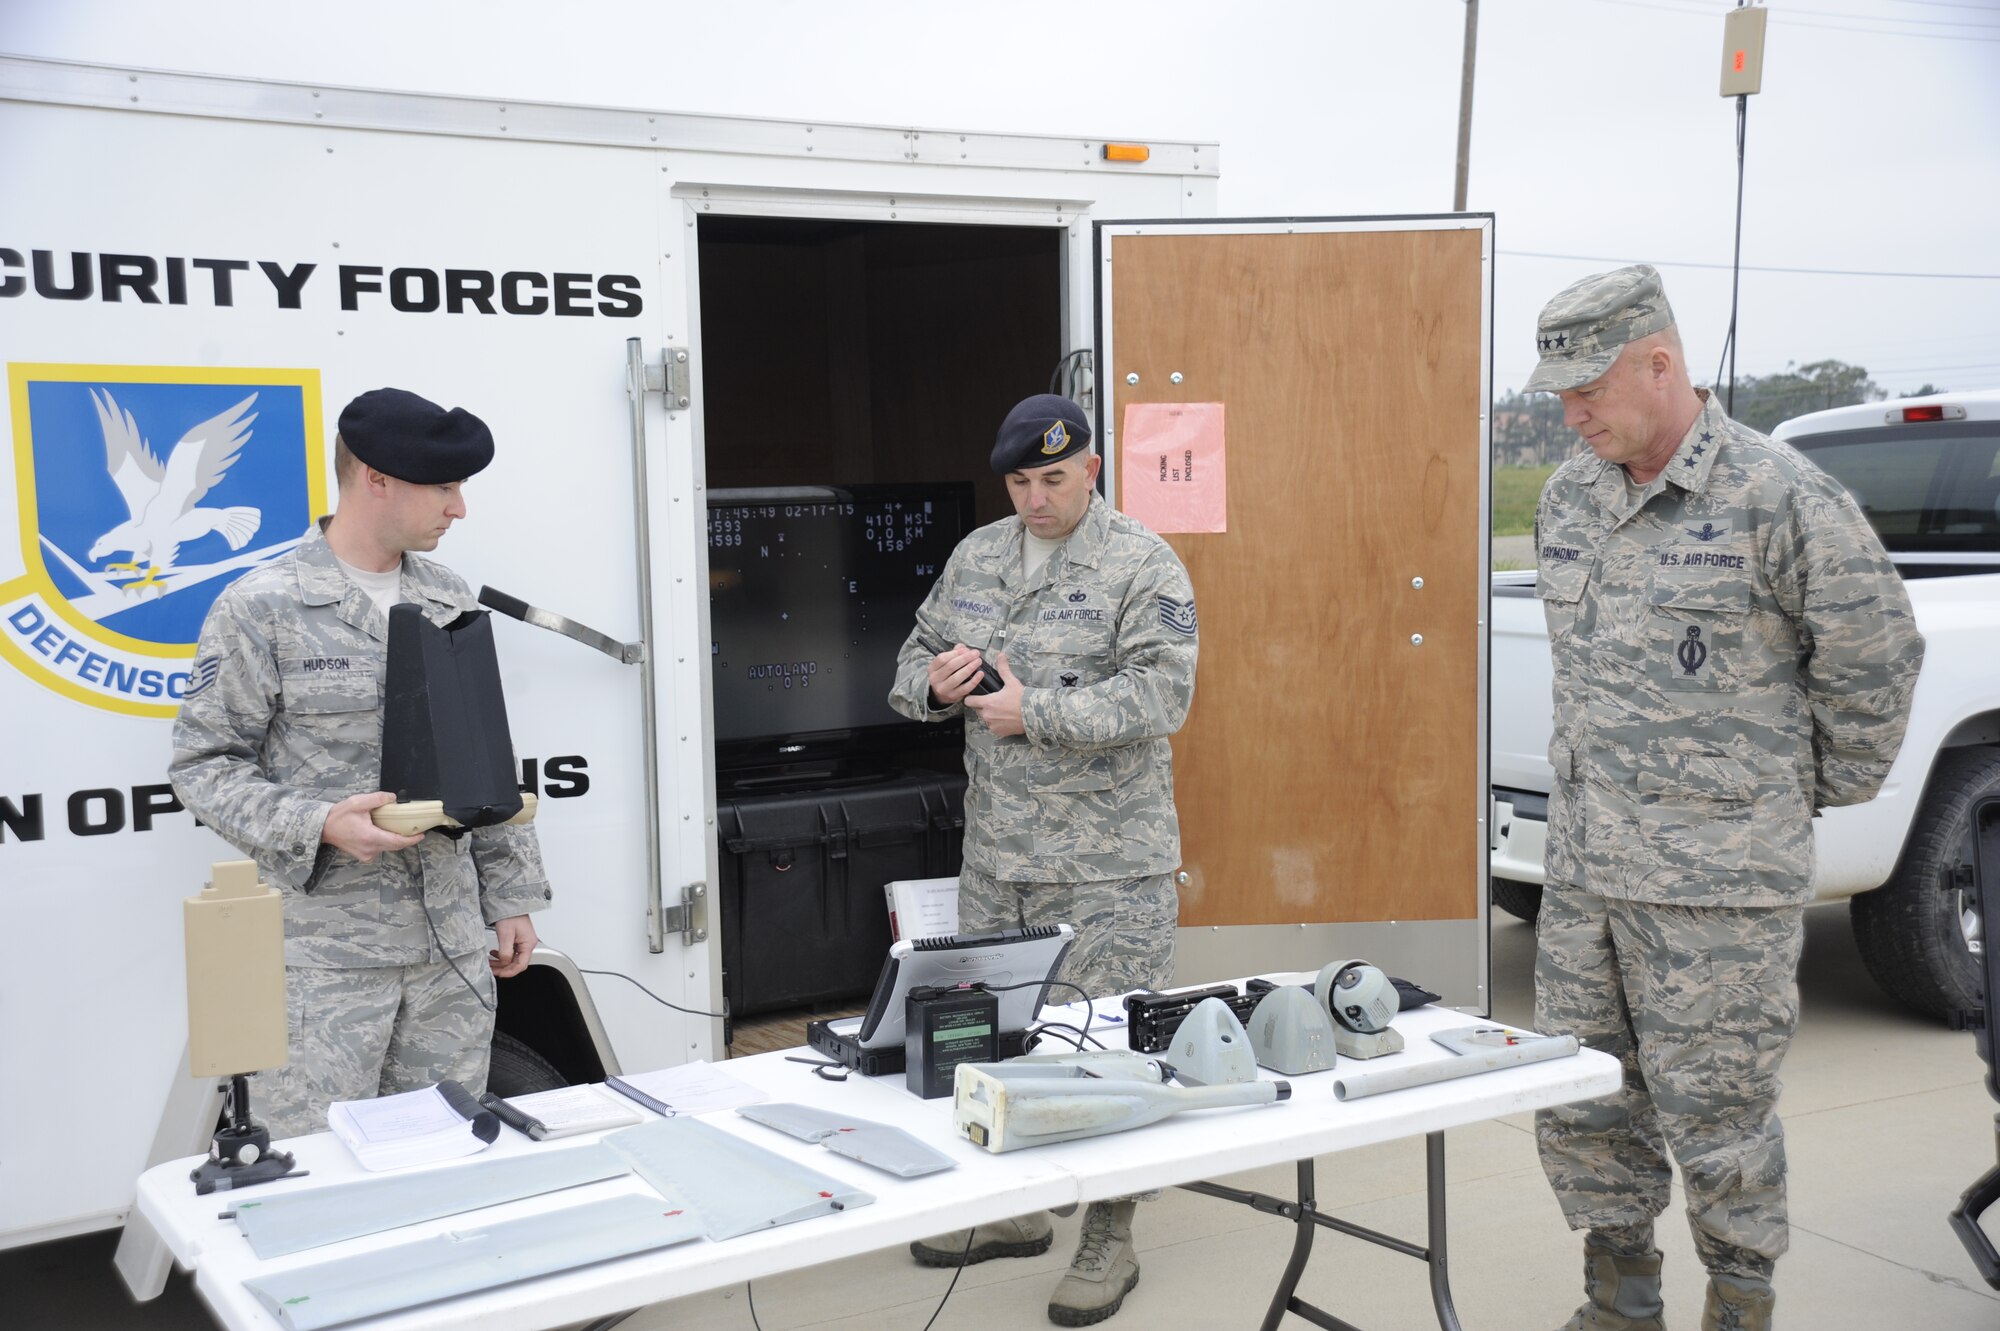 Staff Sgt. Rian Hudson and Tech. Sgt. Benjamin Hawkinson, 30th Security Forces Squadron small unmanned aircraft systems operations, demonstrate unmanned aerial aircraft capabilities to Lt. Gen. John Raymond, Commander, 14th Air Force (Air Forces Strategic) and Joint Functional Component Command for Space, during a base tour, Feb. 17, 2015, Vandenberg Air Force Base, Calif. The model of Unmanned Aerial Vehicle employed at Vandenberg, known as Raven-B/DDL, requires two security forces operators and is utilized for its ample reconnaissance capabilities. (U.S. Air Force Photo by Airman Robert J. Volio/Released)